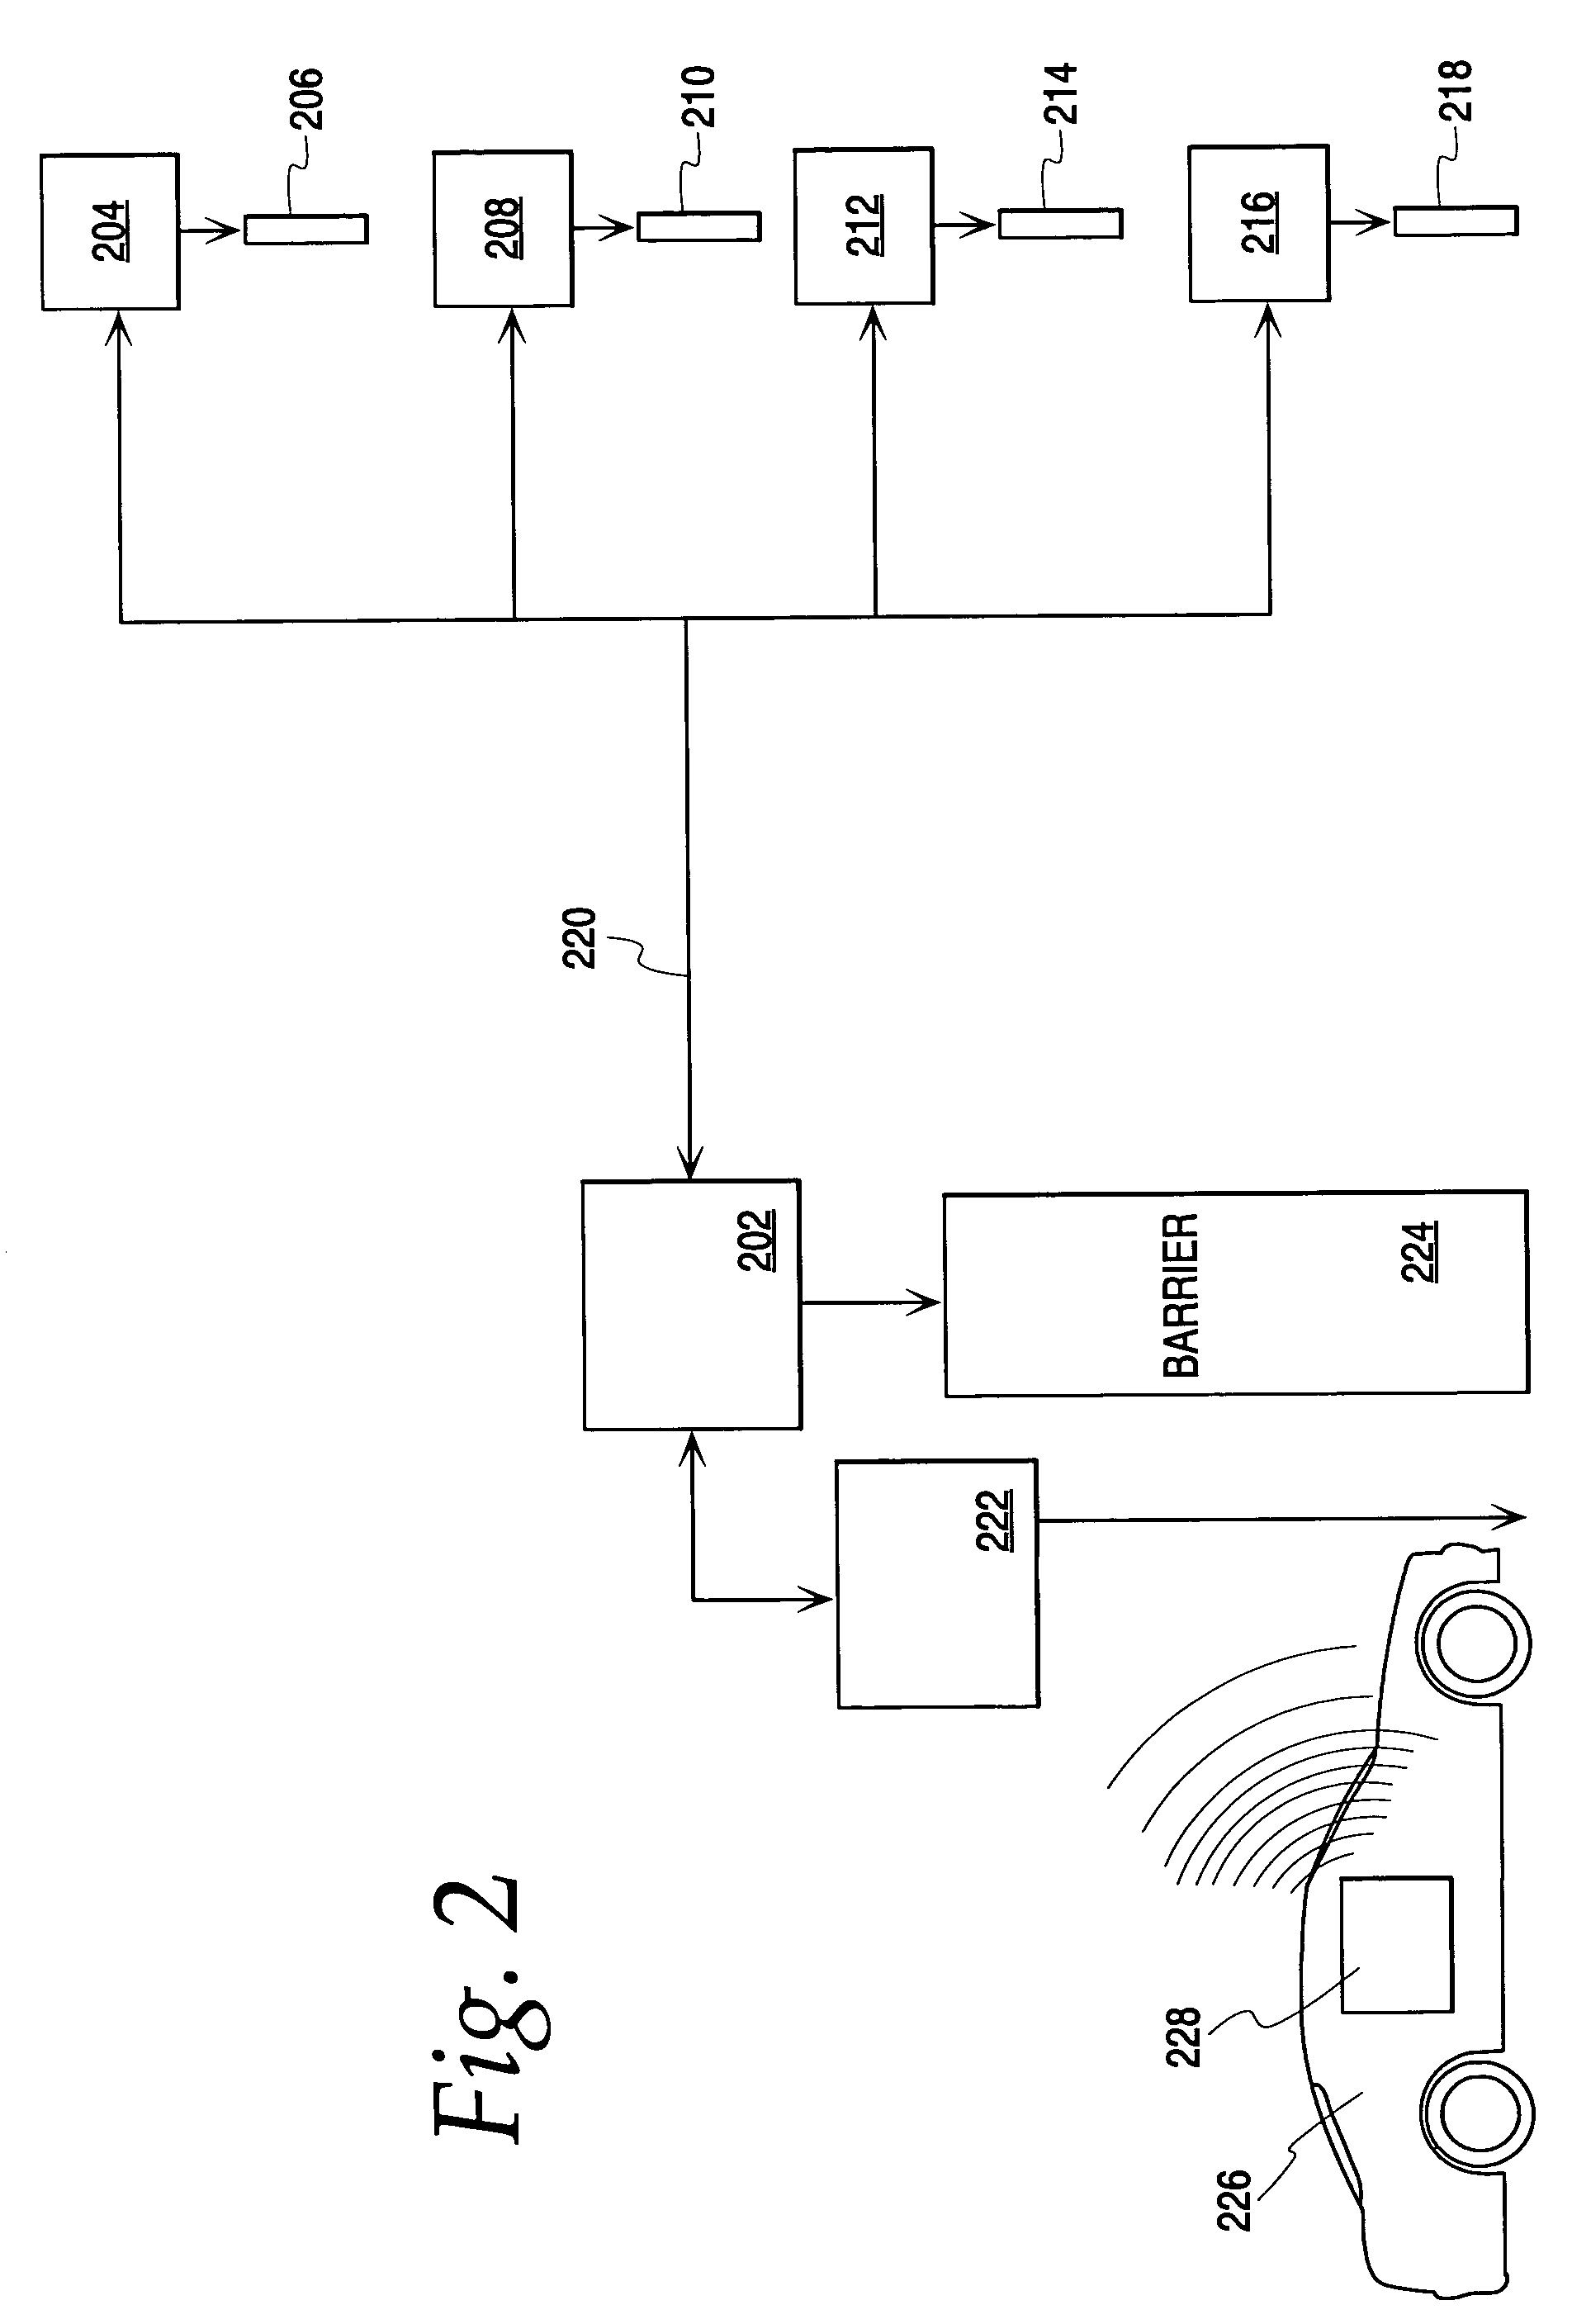 System and method for operating multiple moveable barrier operators